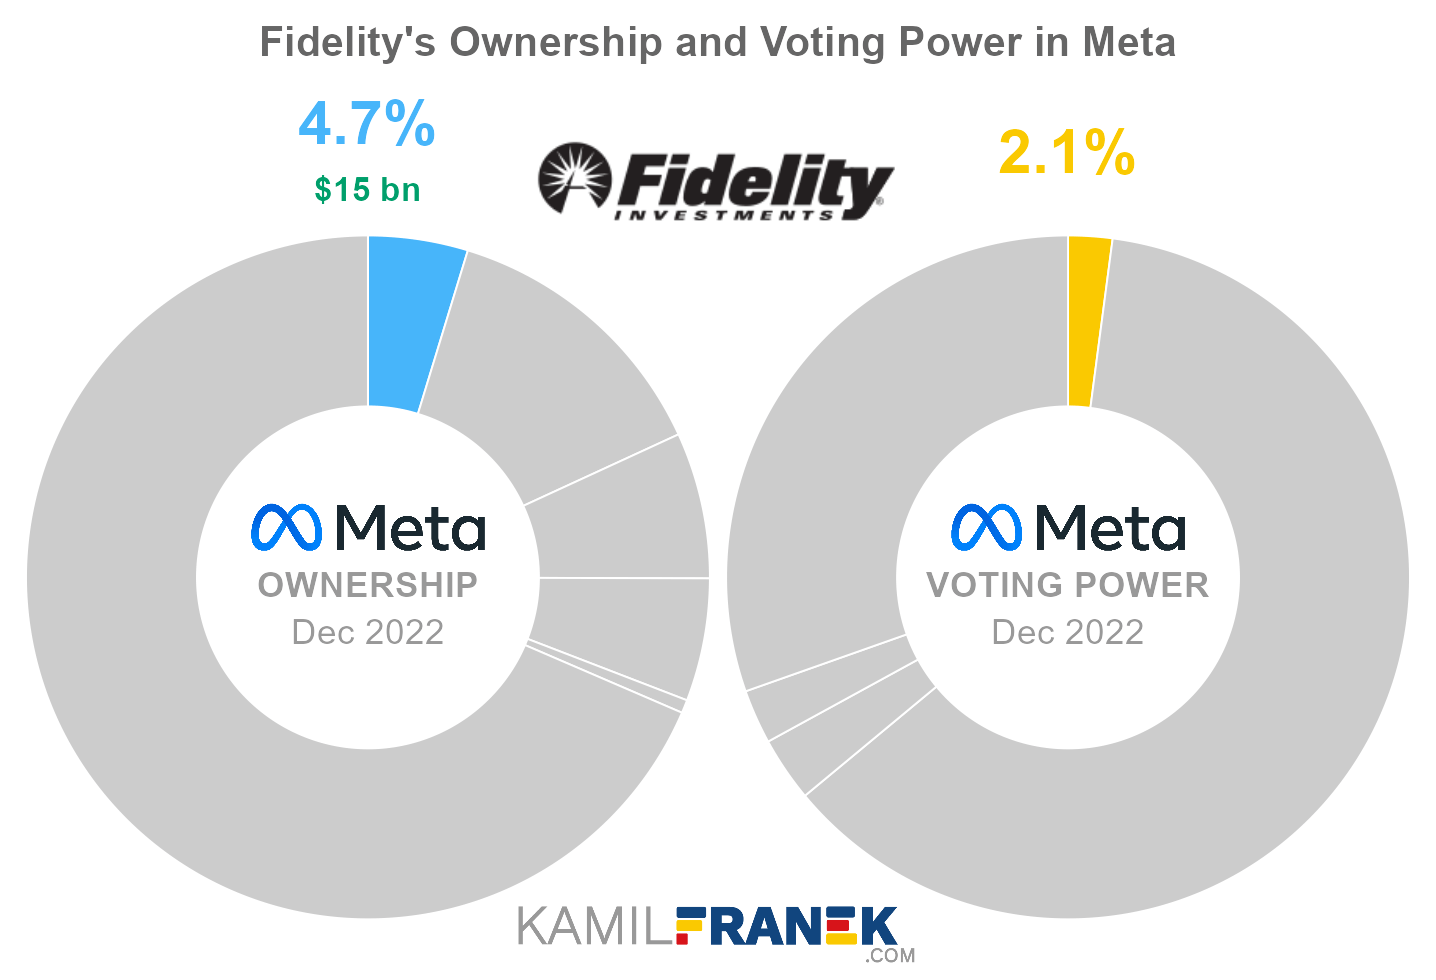 Fidelity's share ownership and voting power in Meta (chart)